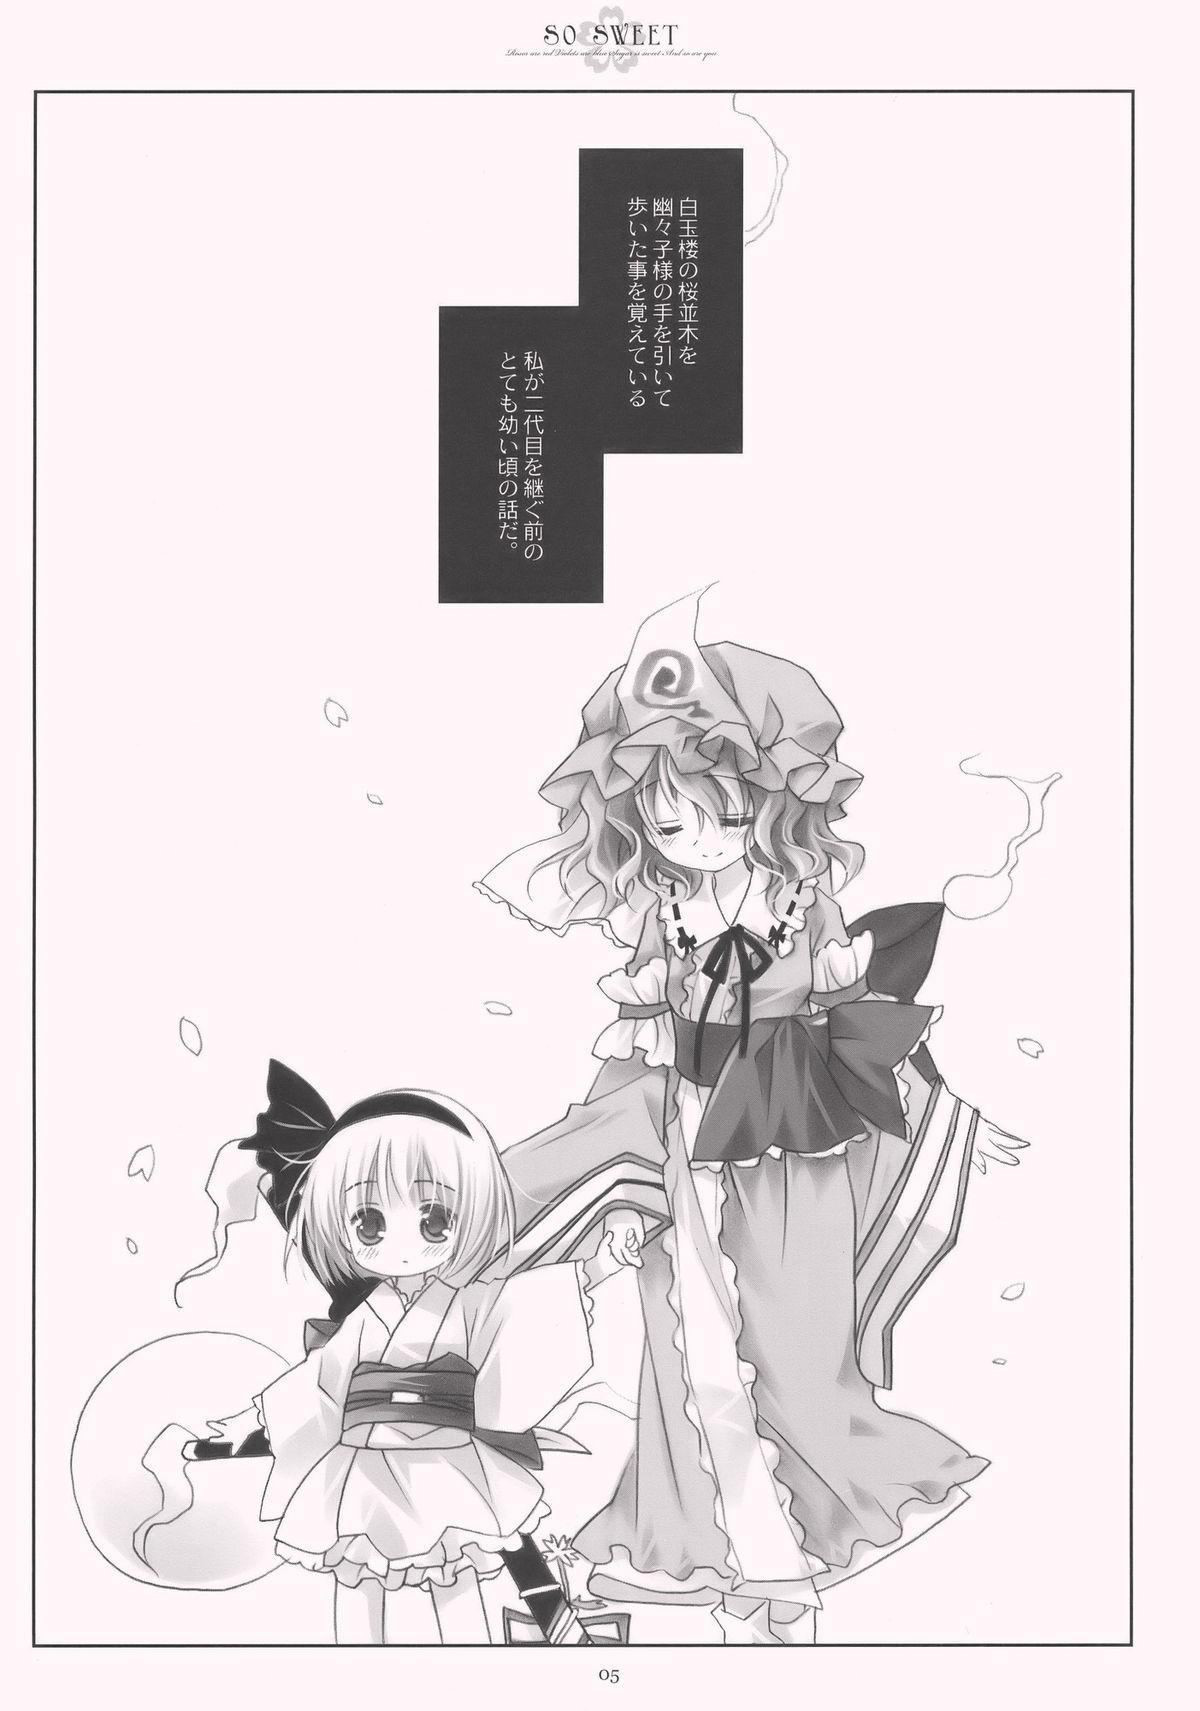 Hot SO SWEET - Touhou project Rebolando - Page 5